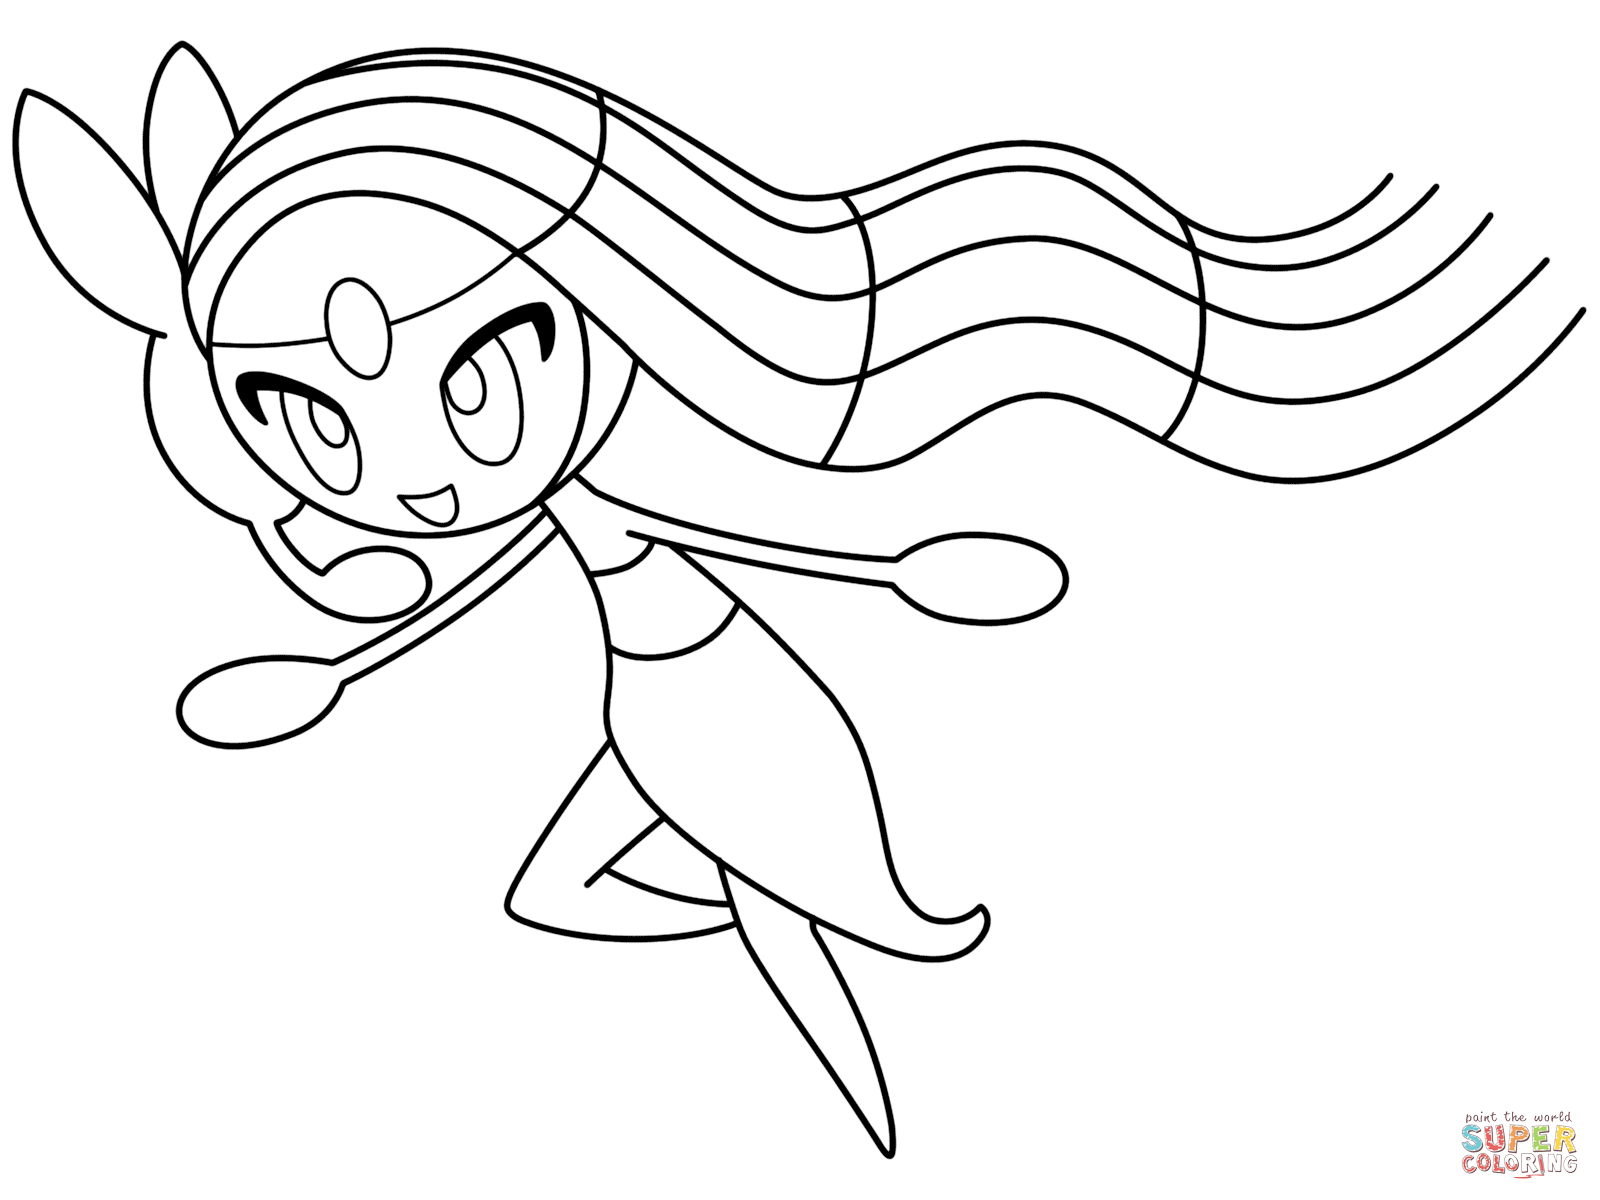 Meloetta coloring page free printable coloring pages